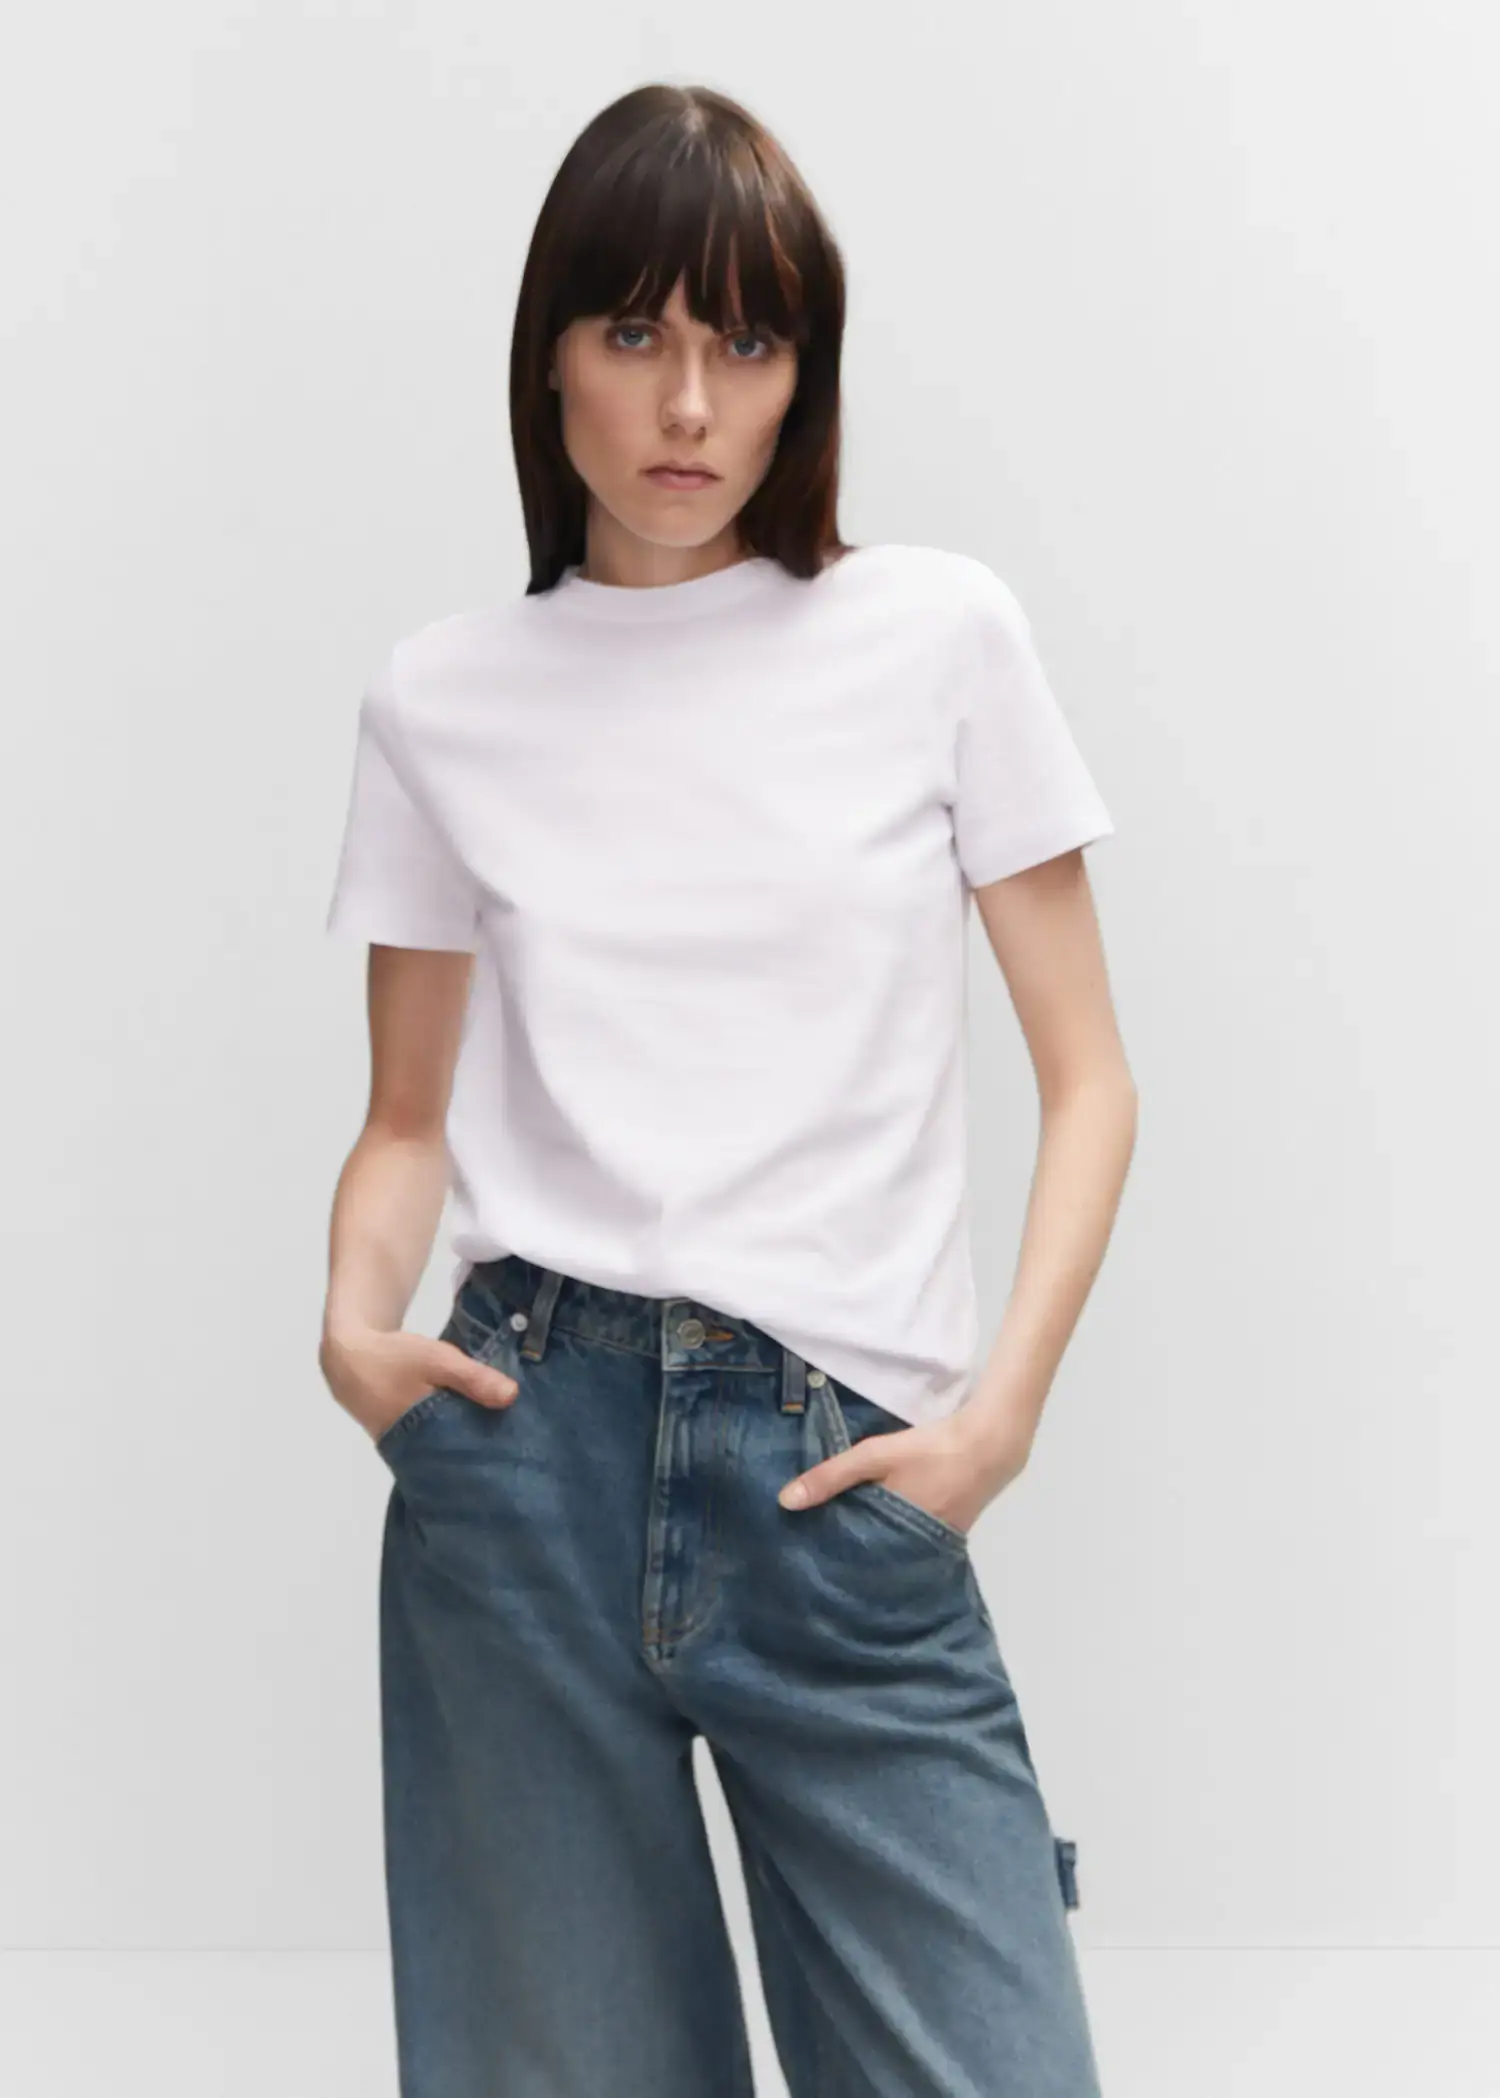 Mango 100% cotton T-shirt. a woman in white shirt and jeans posing for a picture. 